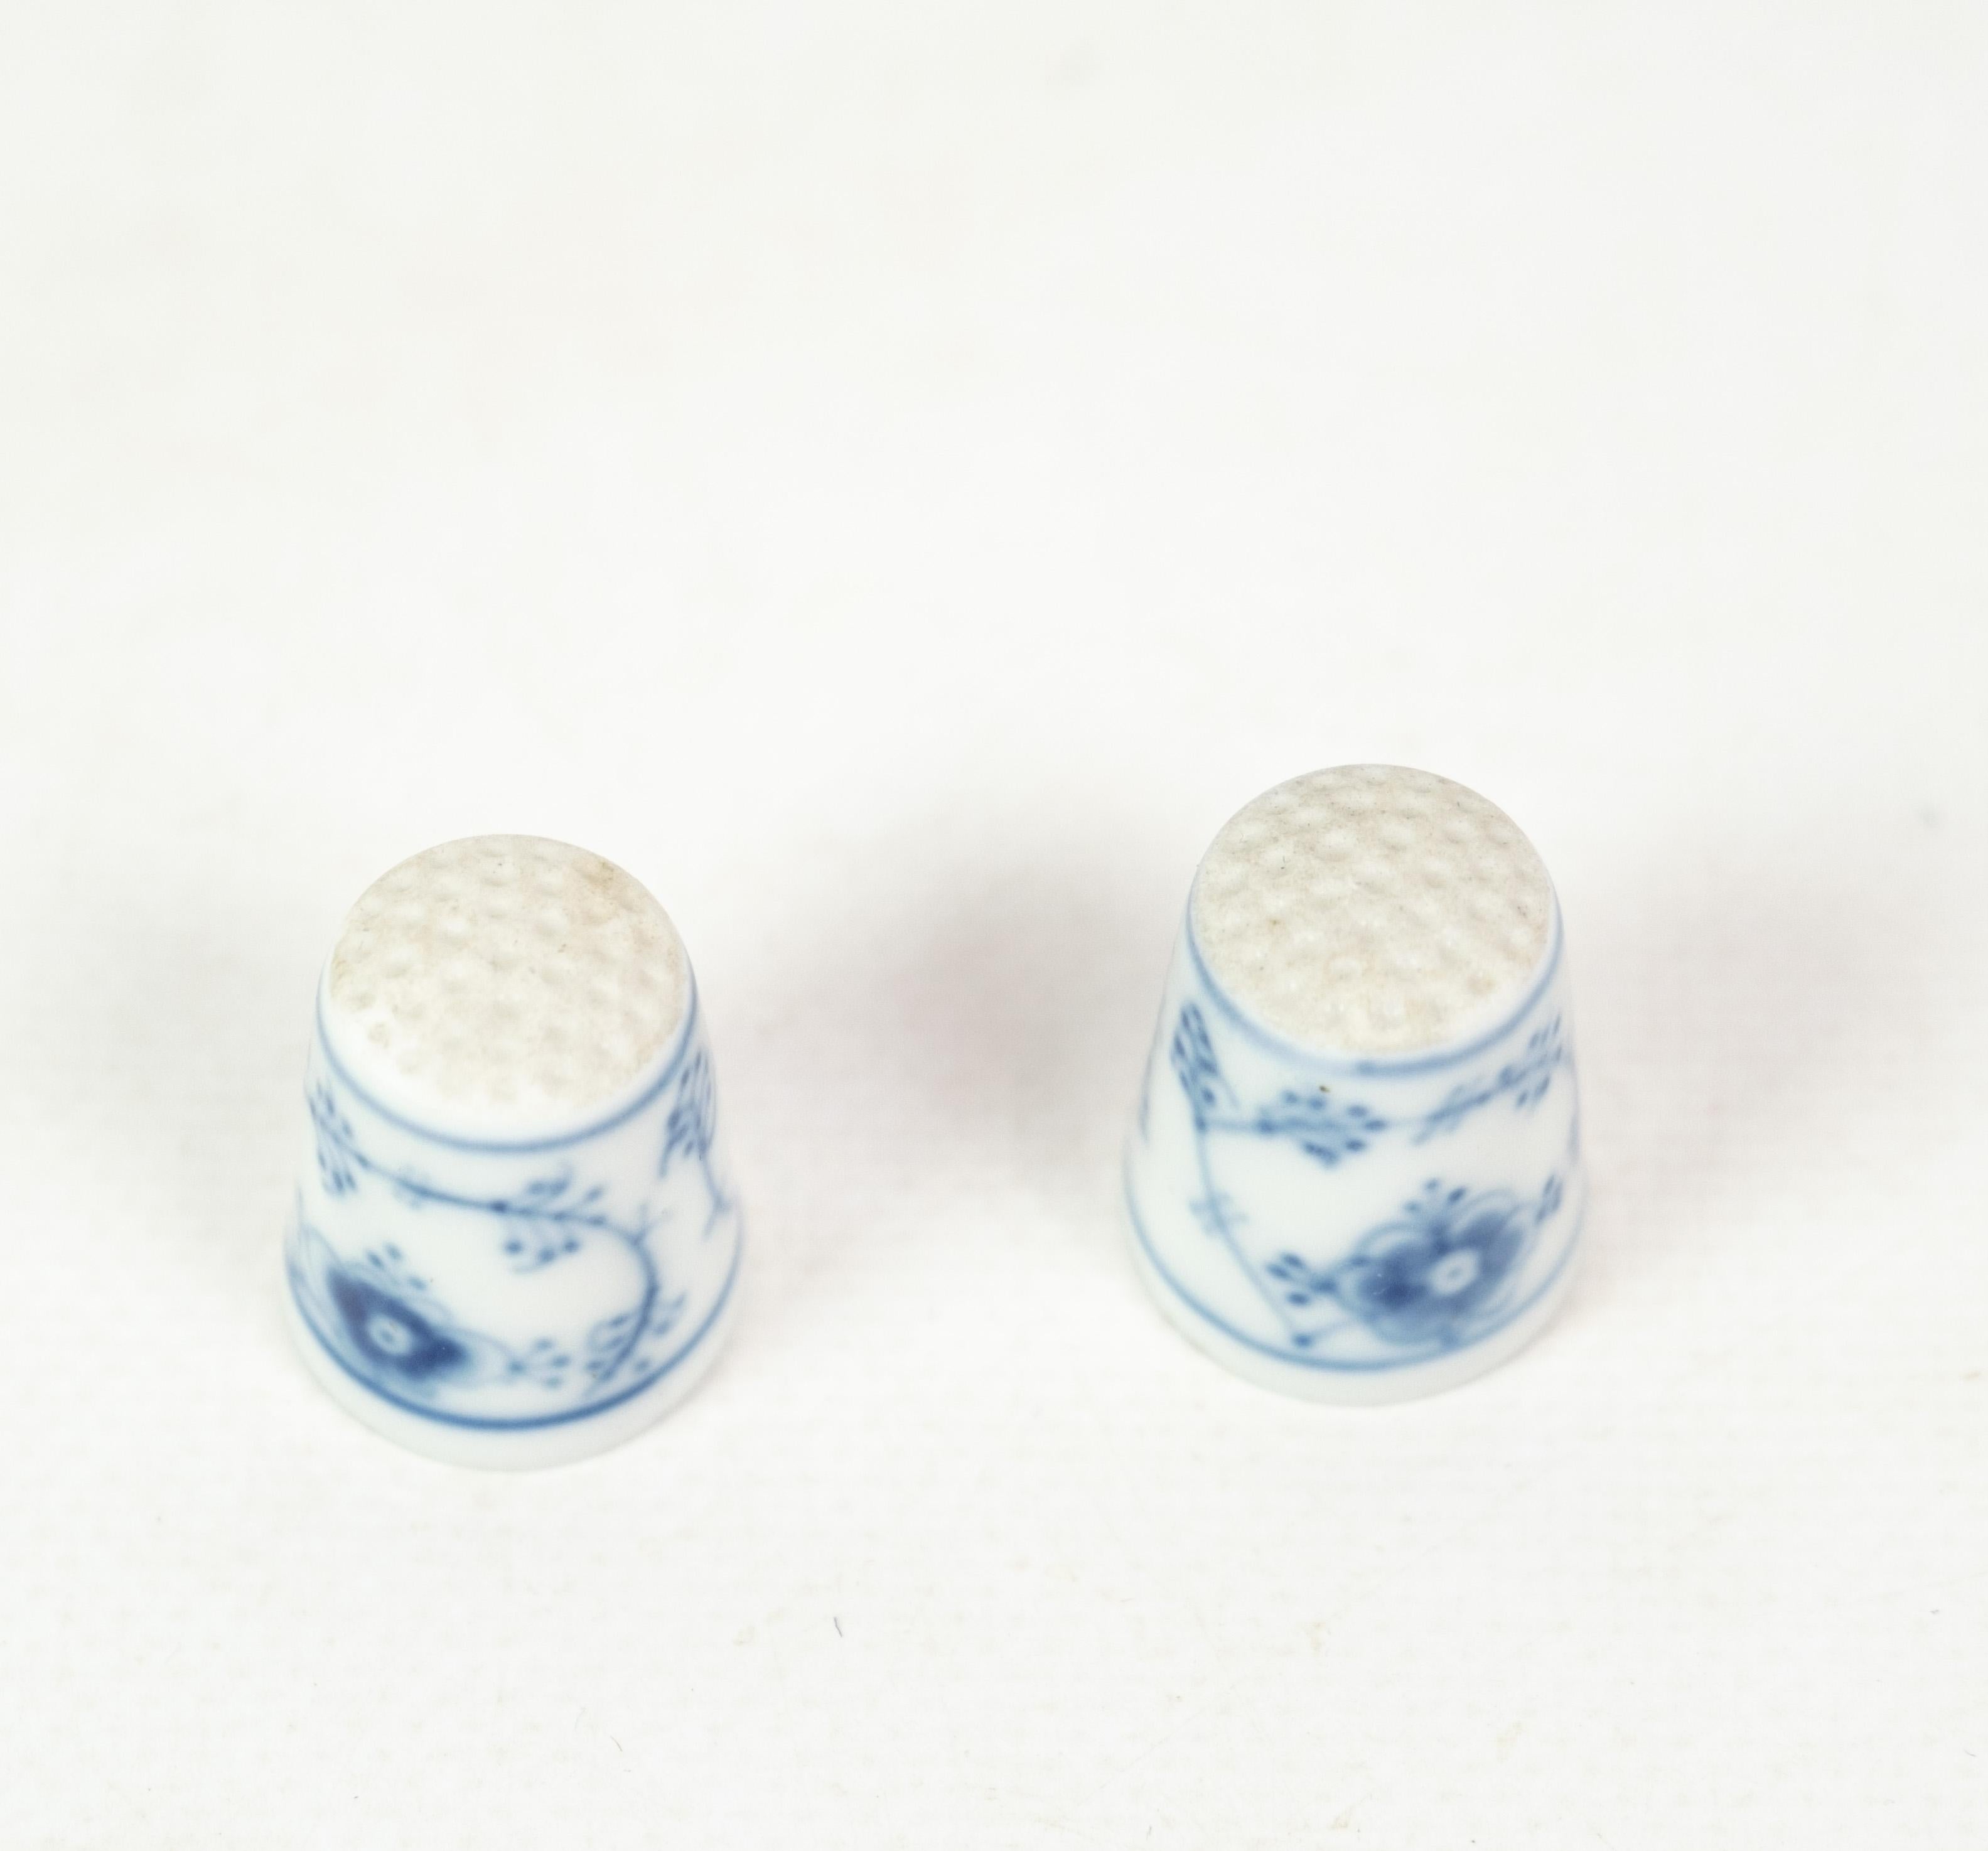 Royal porcelain mussel-painted thimble from around the 1950s in very fine condition.